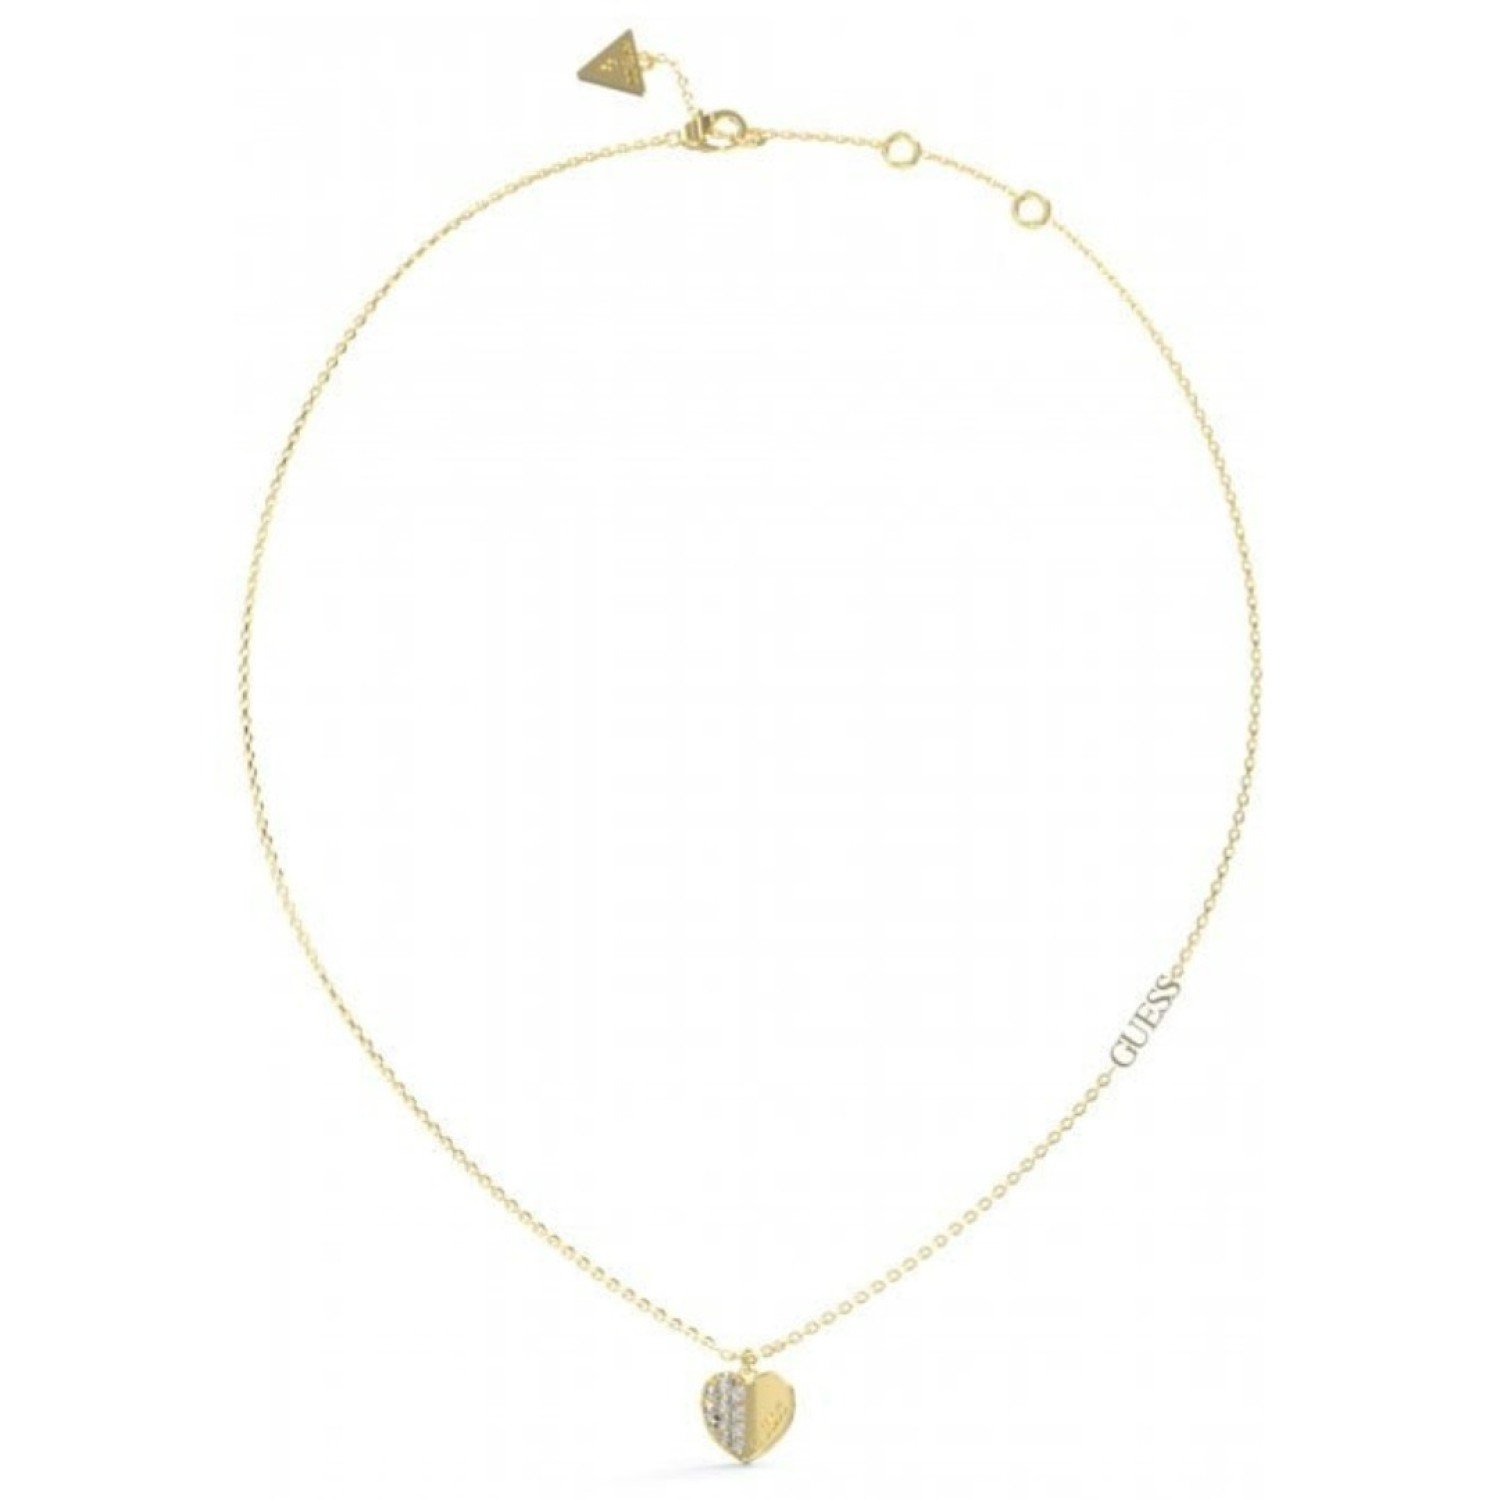 Guess 16-18" Plain and Pave Heart Charm Necklace in Gold JUBN03035JWYGT JUBN03035JWRHT diamond jewellery